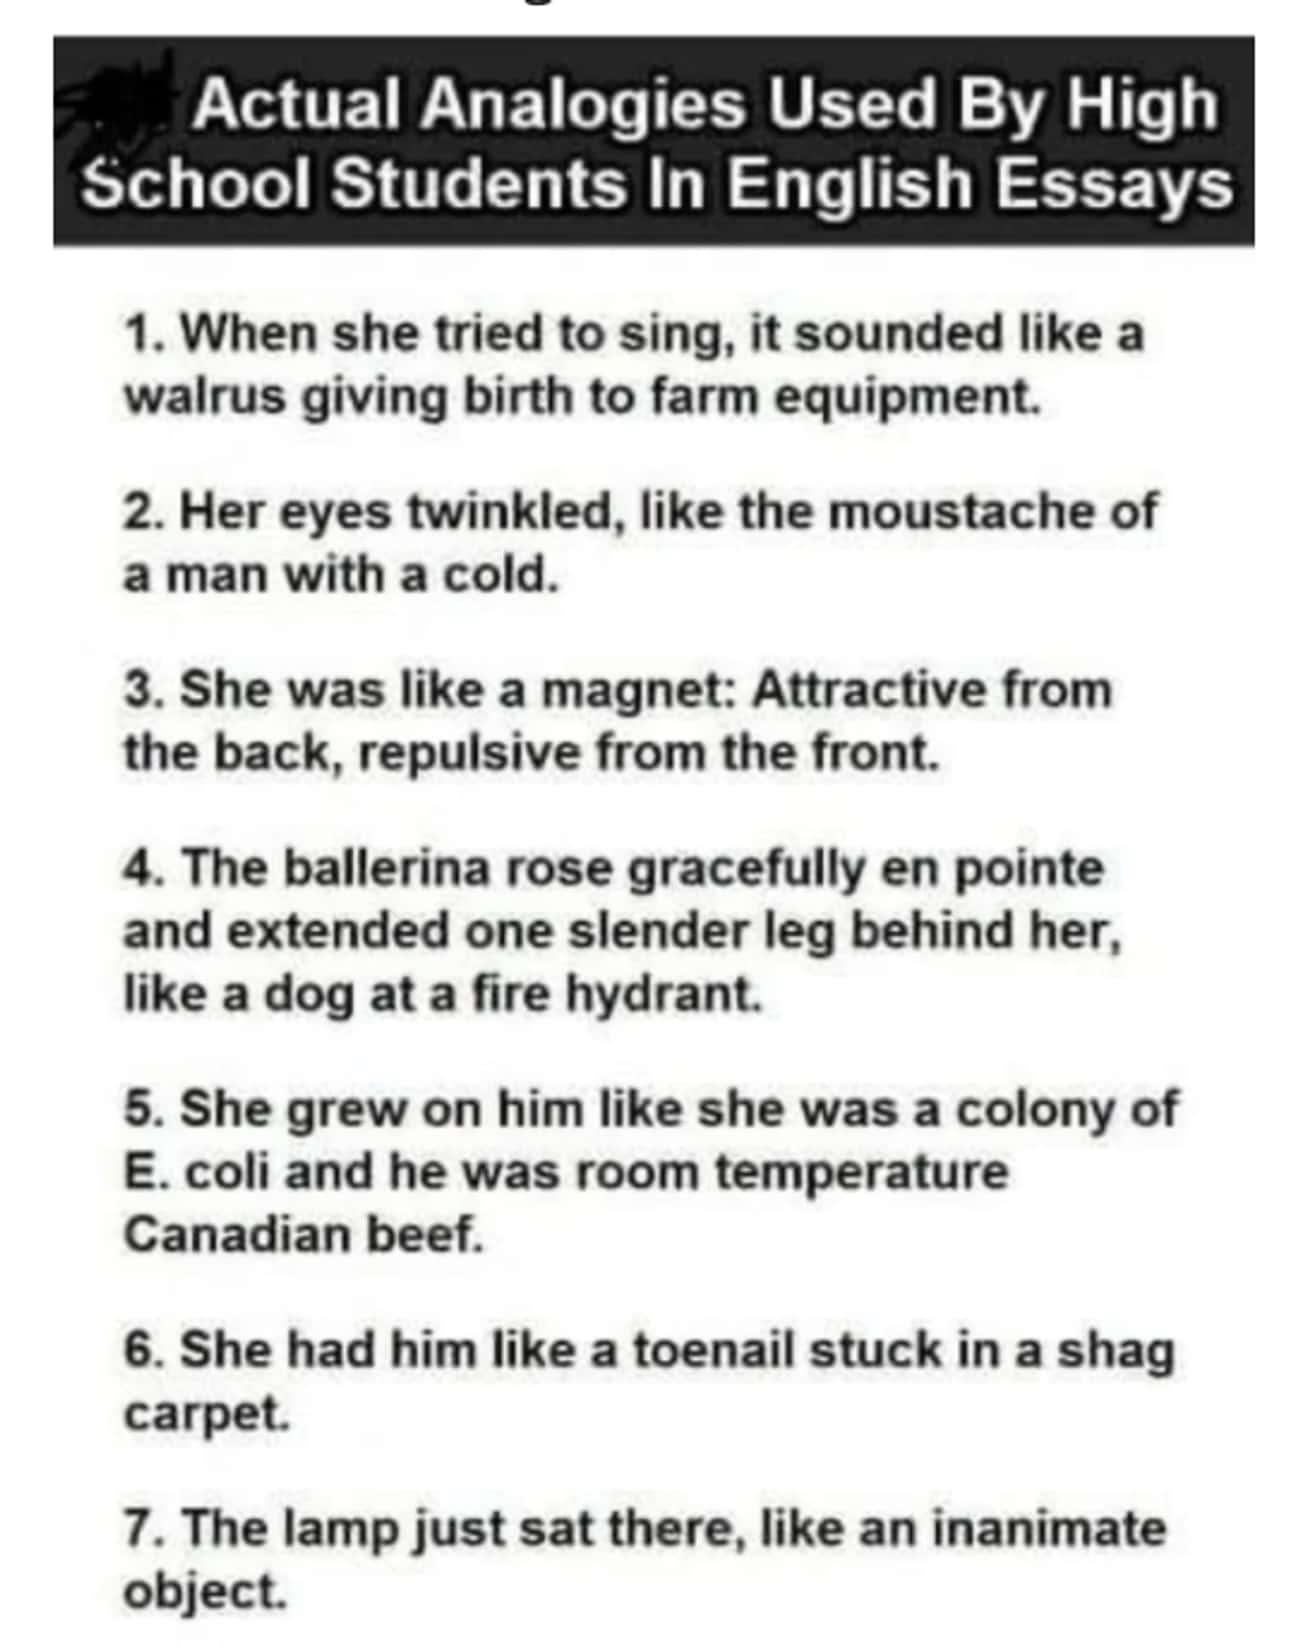 pics and memes daily dose - funny analogys by highschool students - Actual Analogies Used By High School Students In English Essays 1. When she tried to sing, it sounded a walrus giving birth to farm equipment. 2. Her eyes twinkled, the moustache of a man